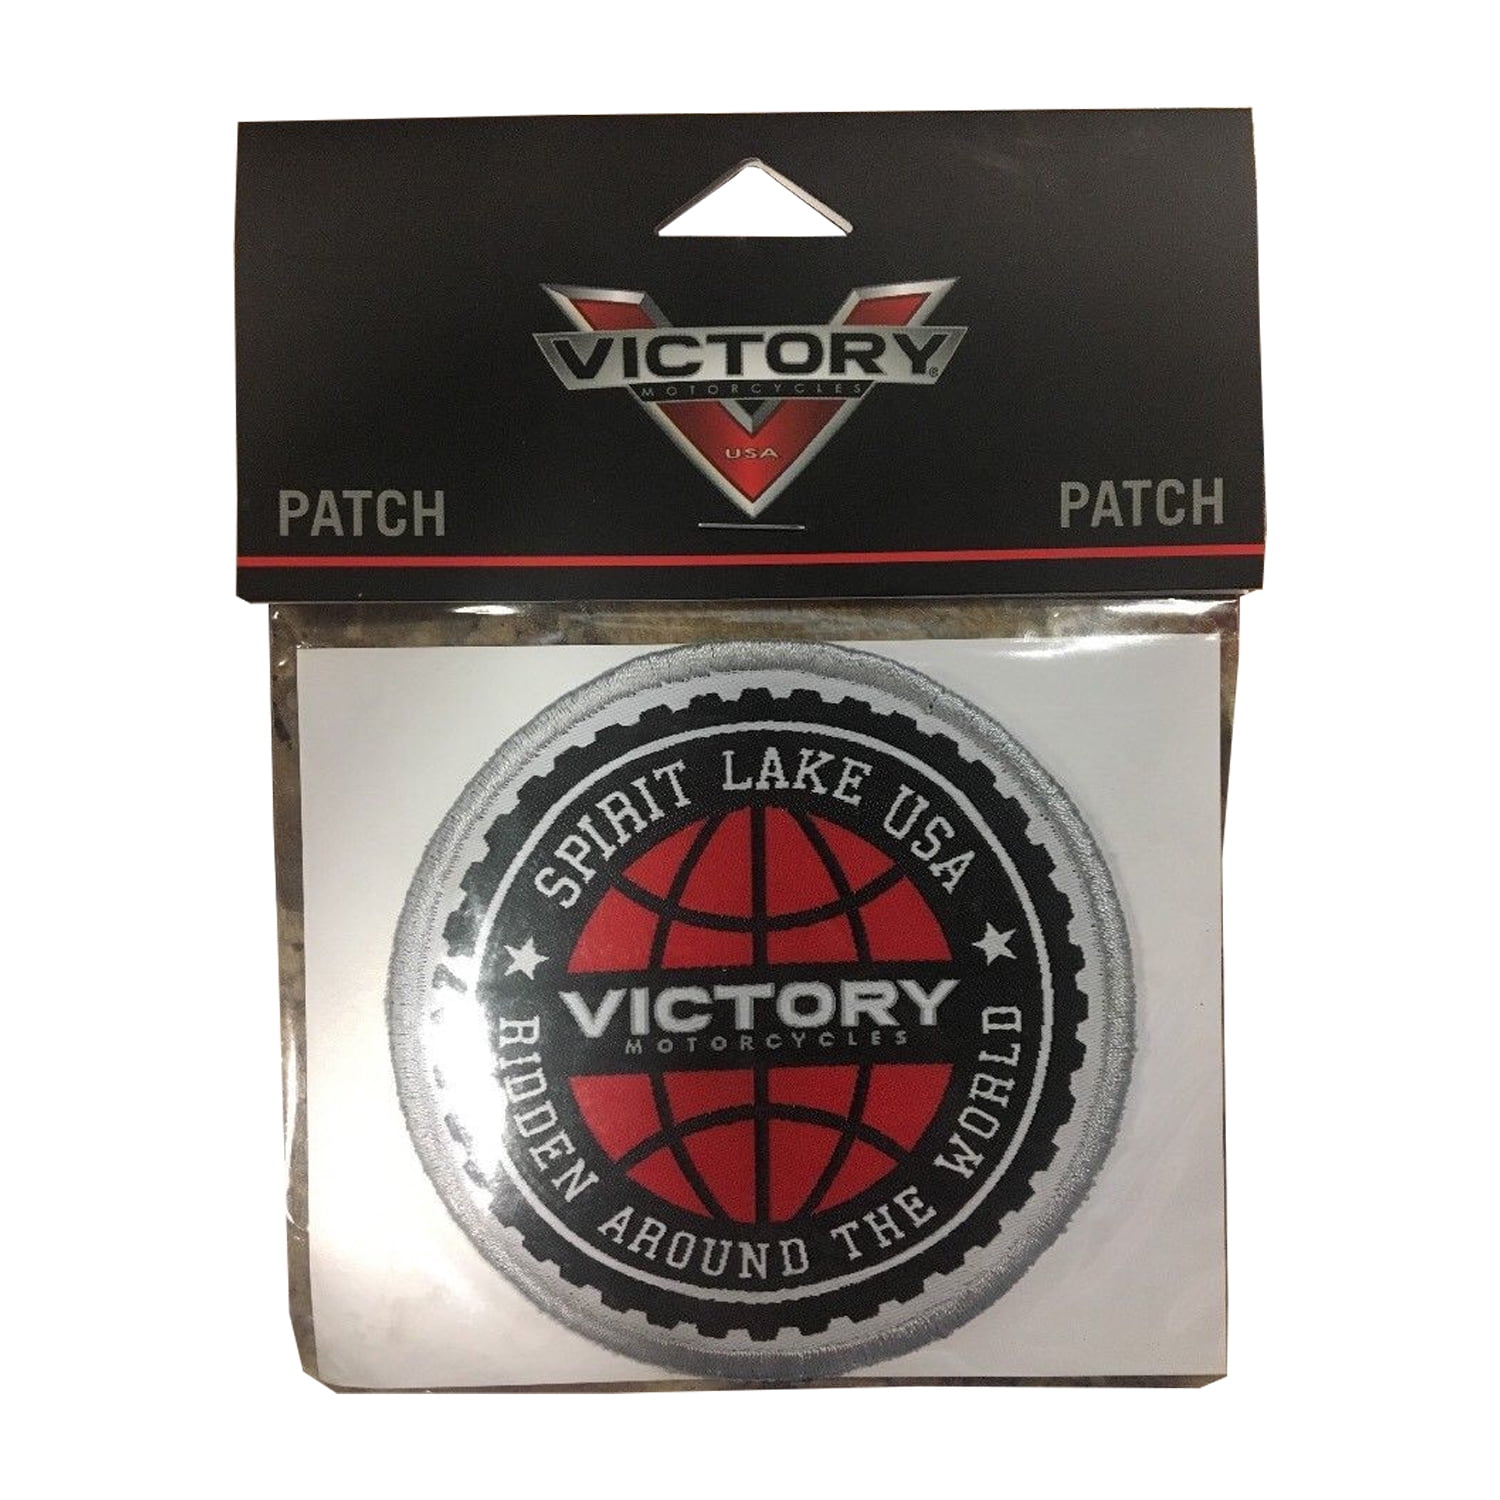 Angels of Death Patches Liberty Motorcycle Biker Patches For Clothing  Embroidery Iron on Patches